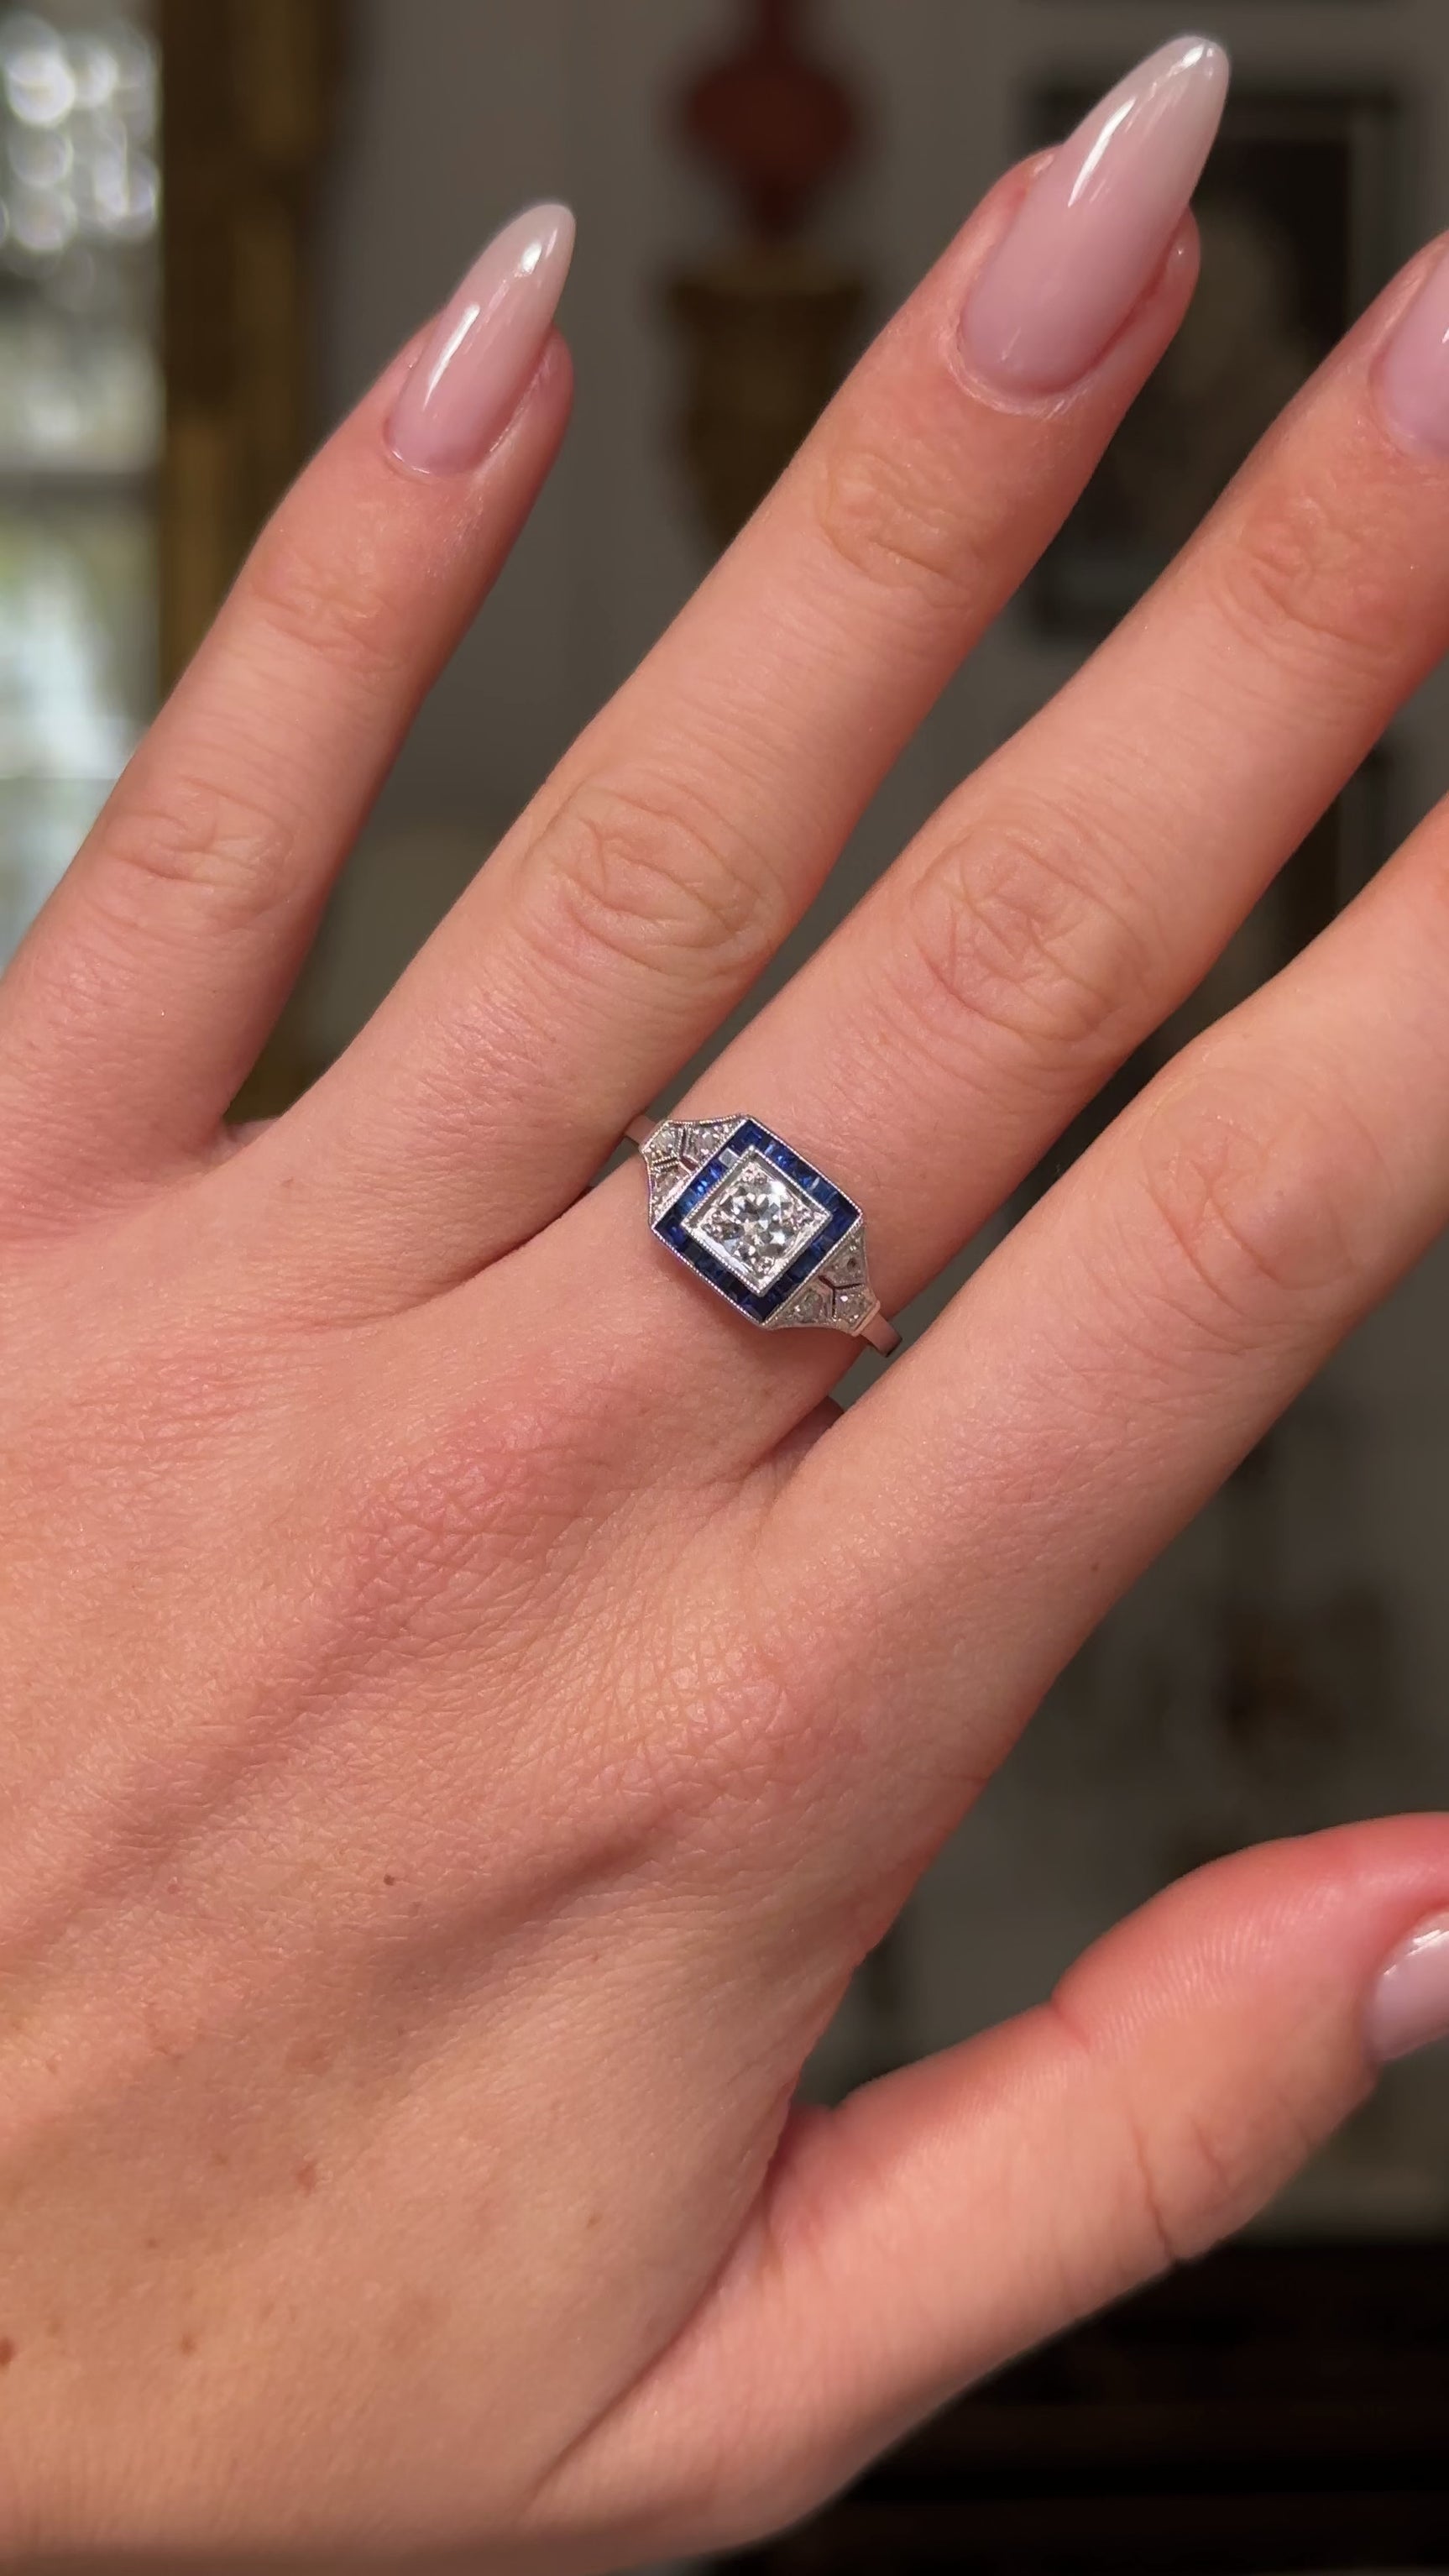 Vintage sapphire and diamond engagement ring, worn on hand and moved around to give perspective.